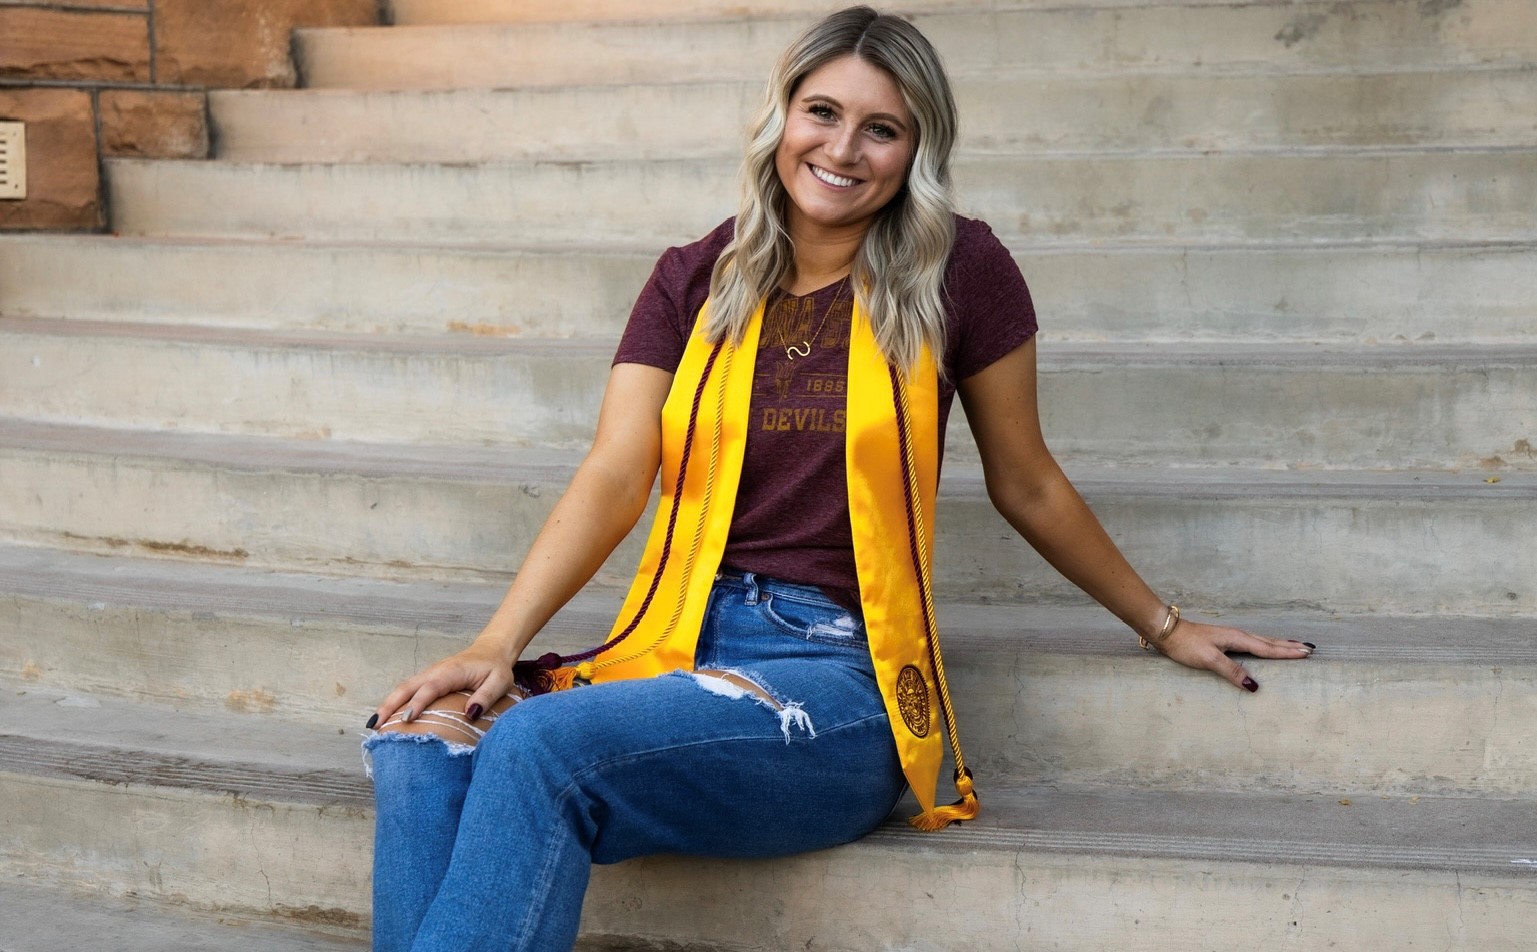  sits on concrete steps, smiling at the camera with her gold graduation sash and maroon cords draped around her neck